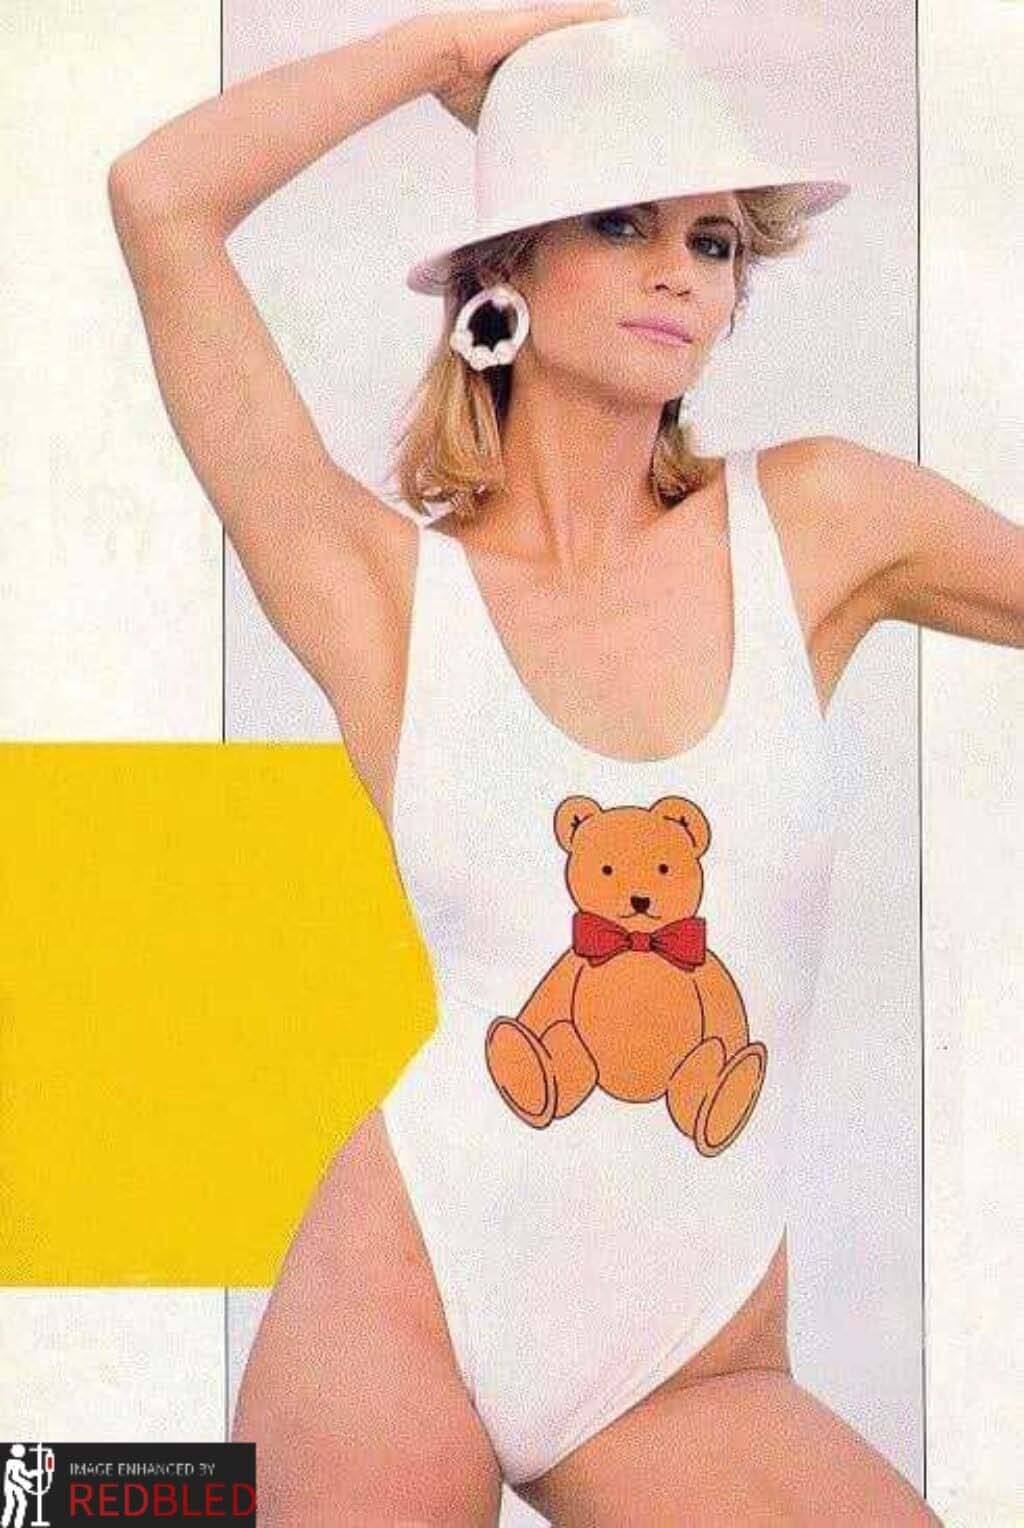 Markie post nude images